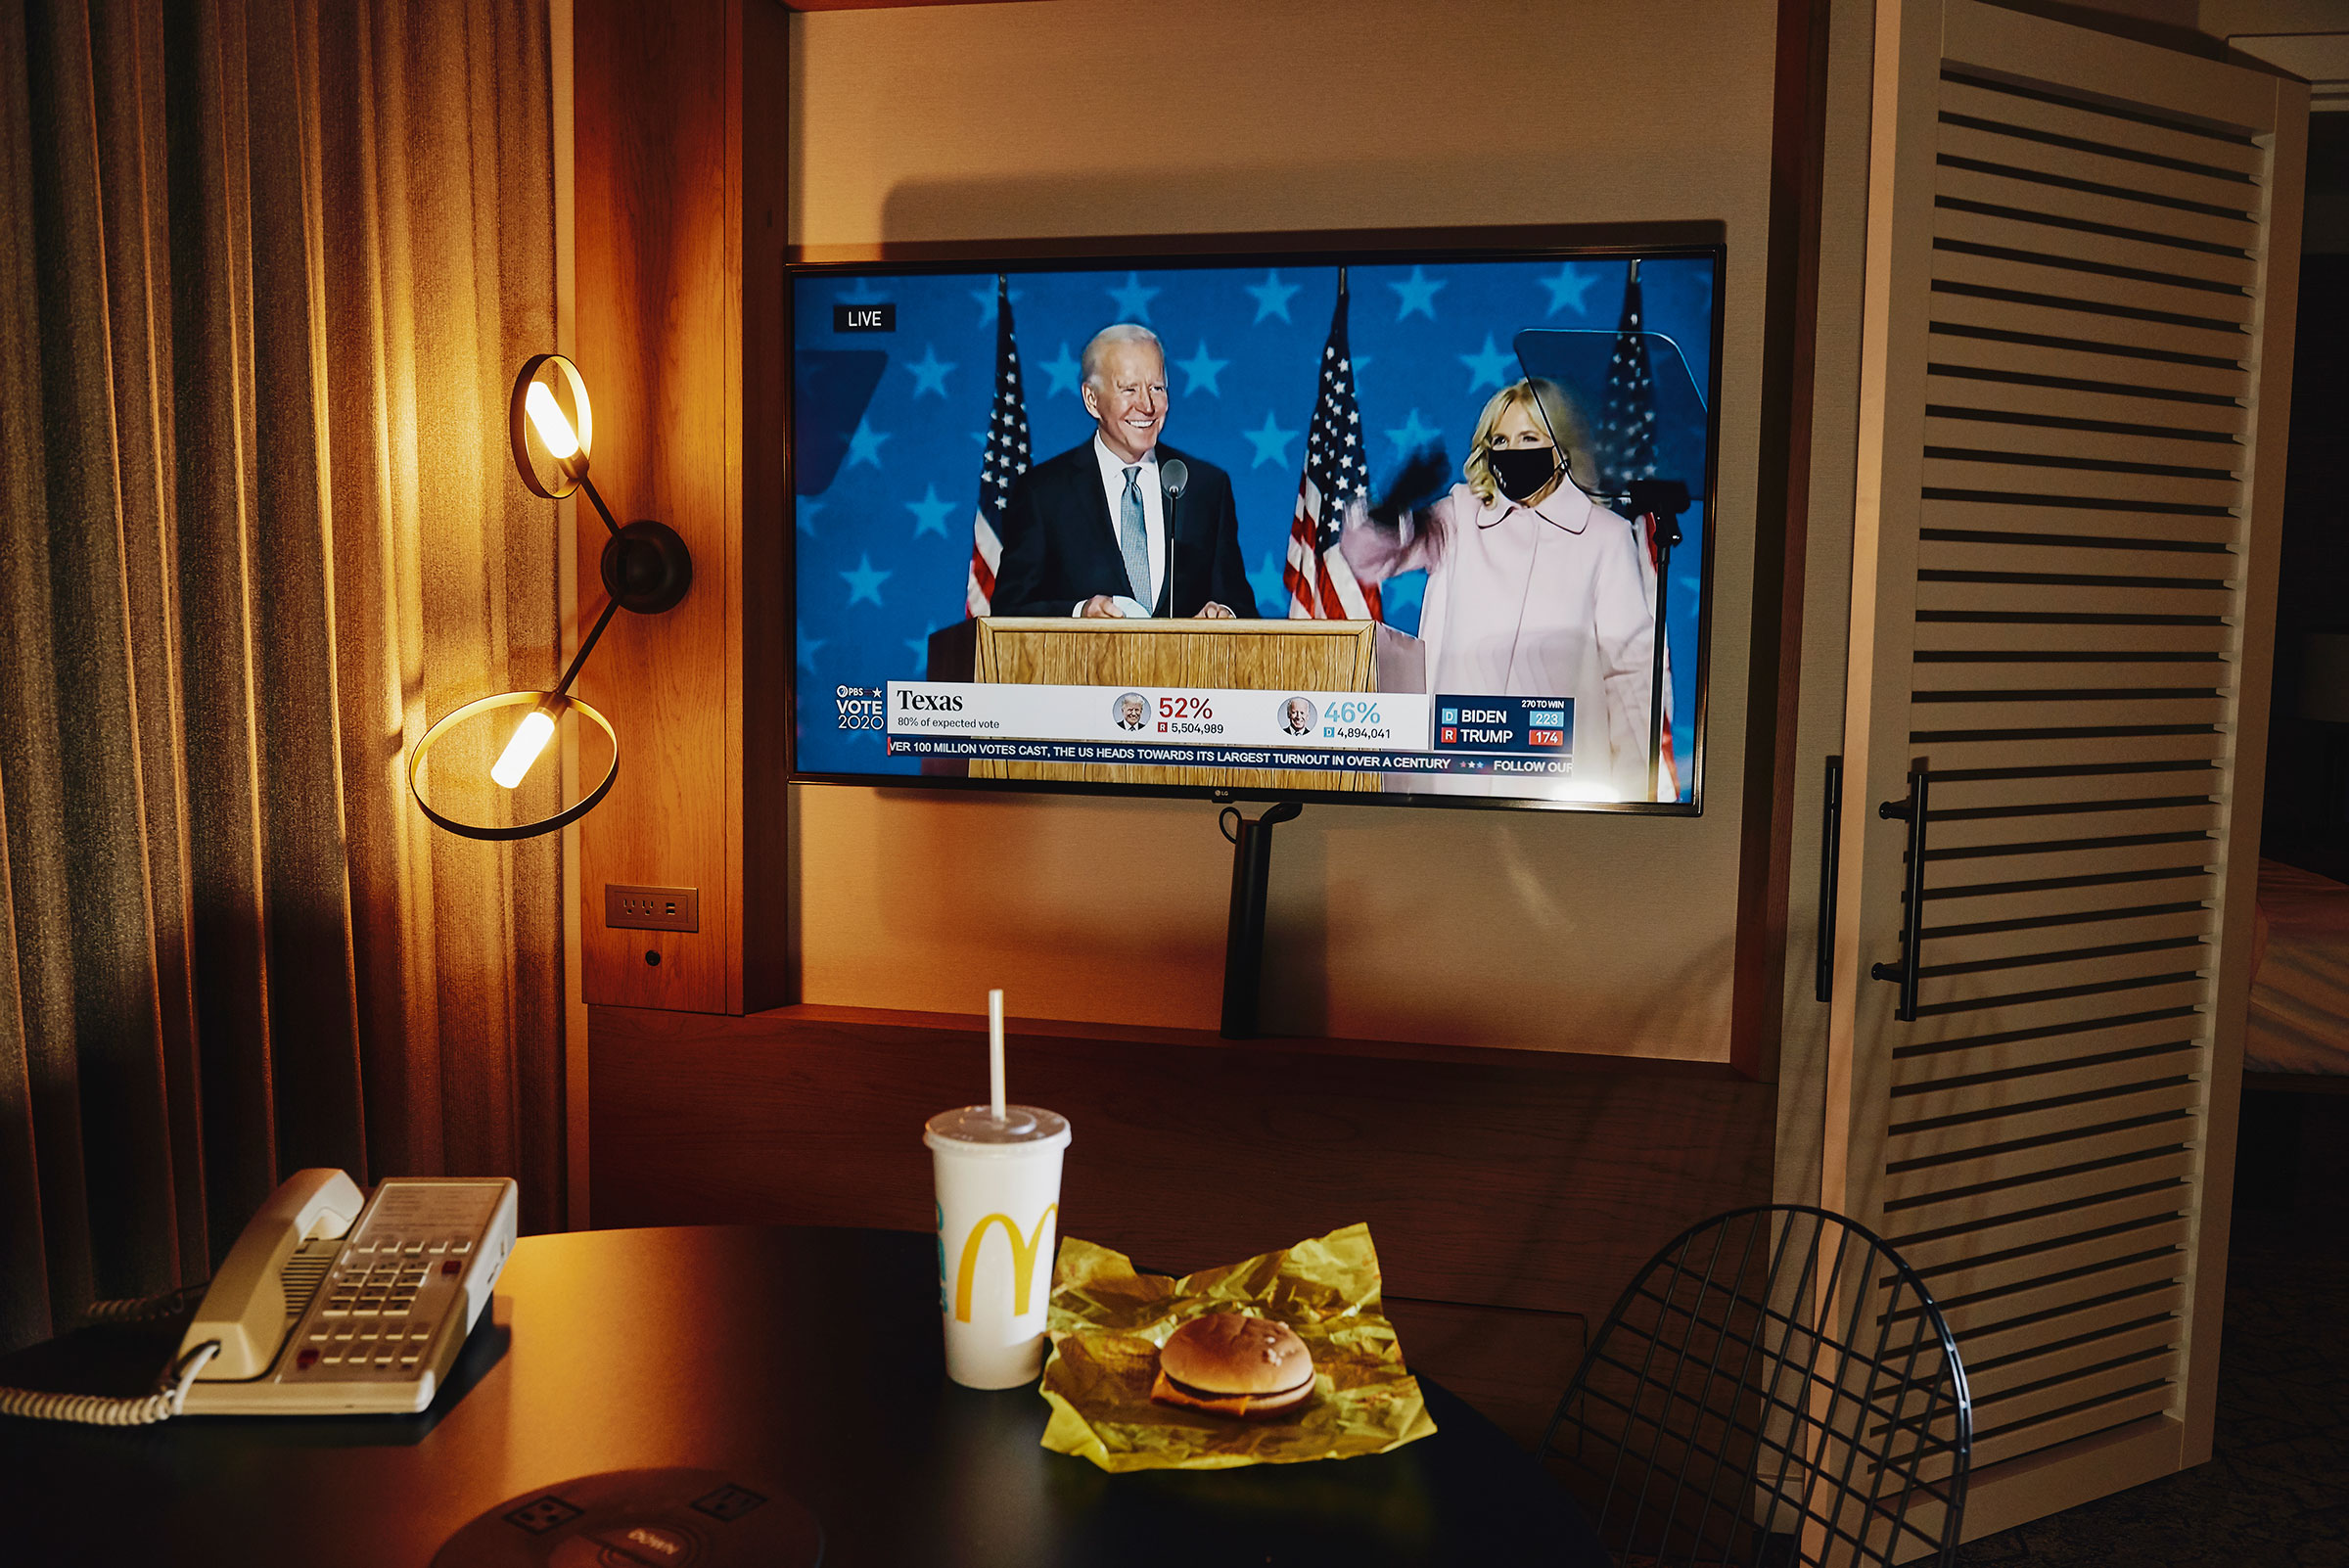 Dinner in a hotel room watching Vice President Biden and Dr. Jill Biden on Election night, Nov. 3